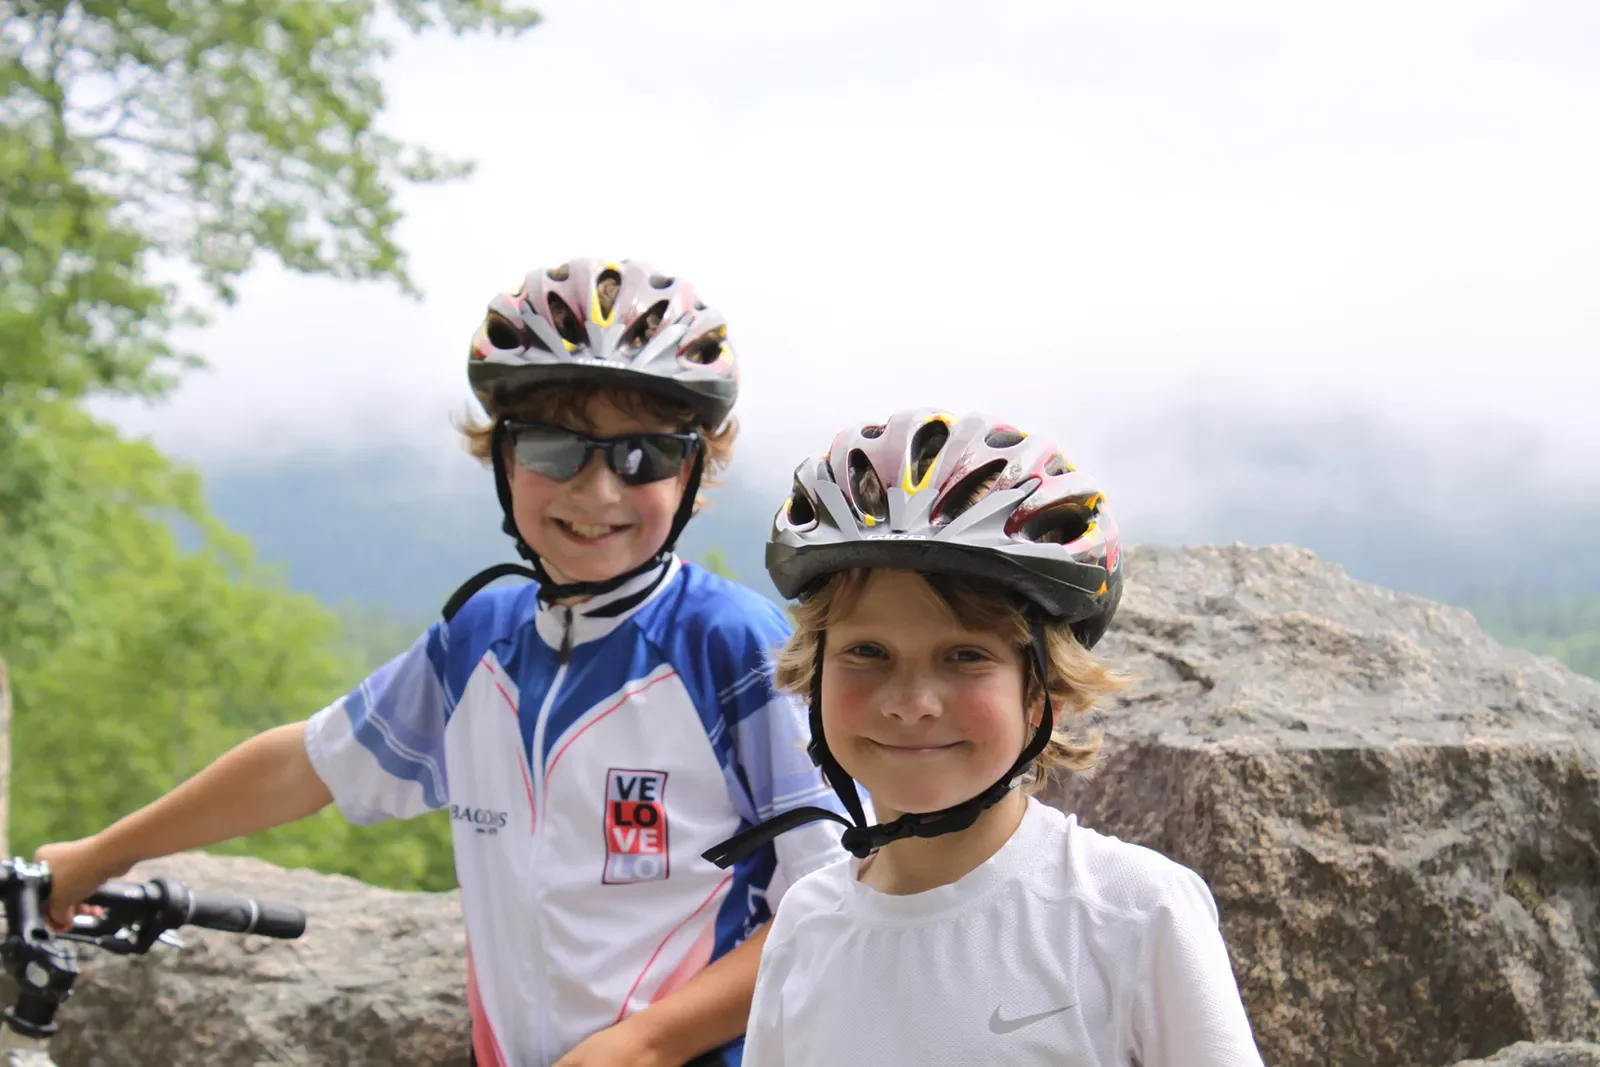 Two child guests in helmets smiling for camera, foggy vista behind them.